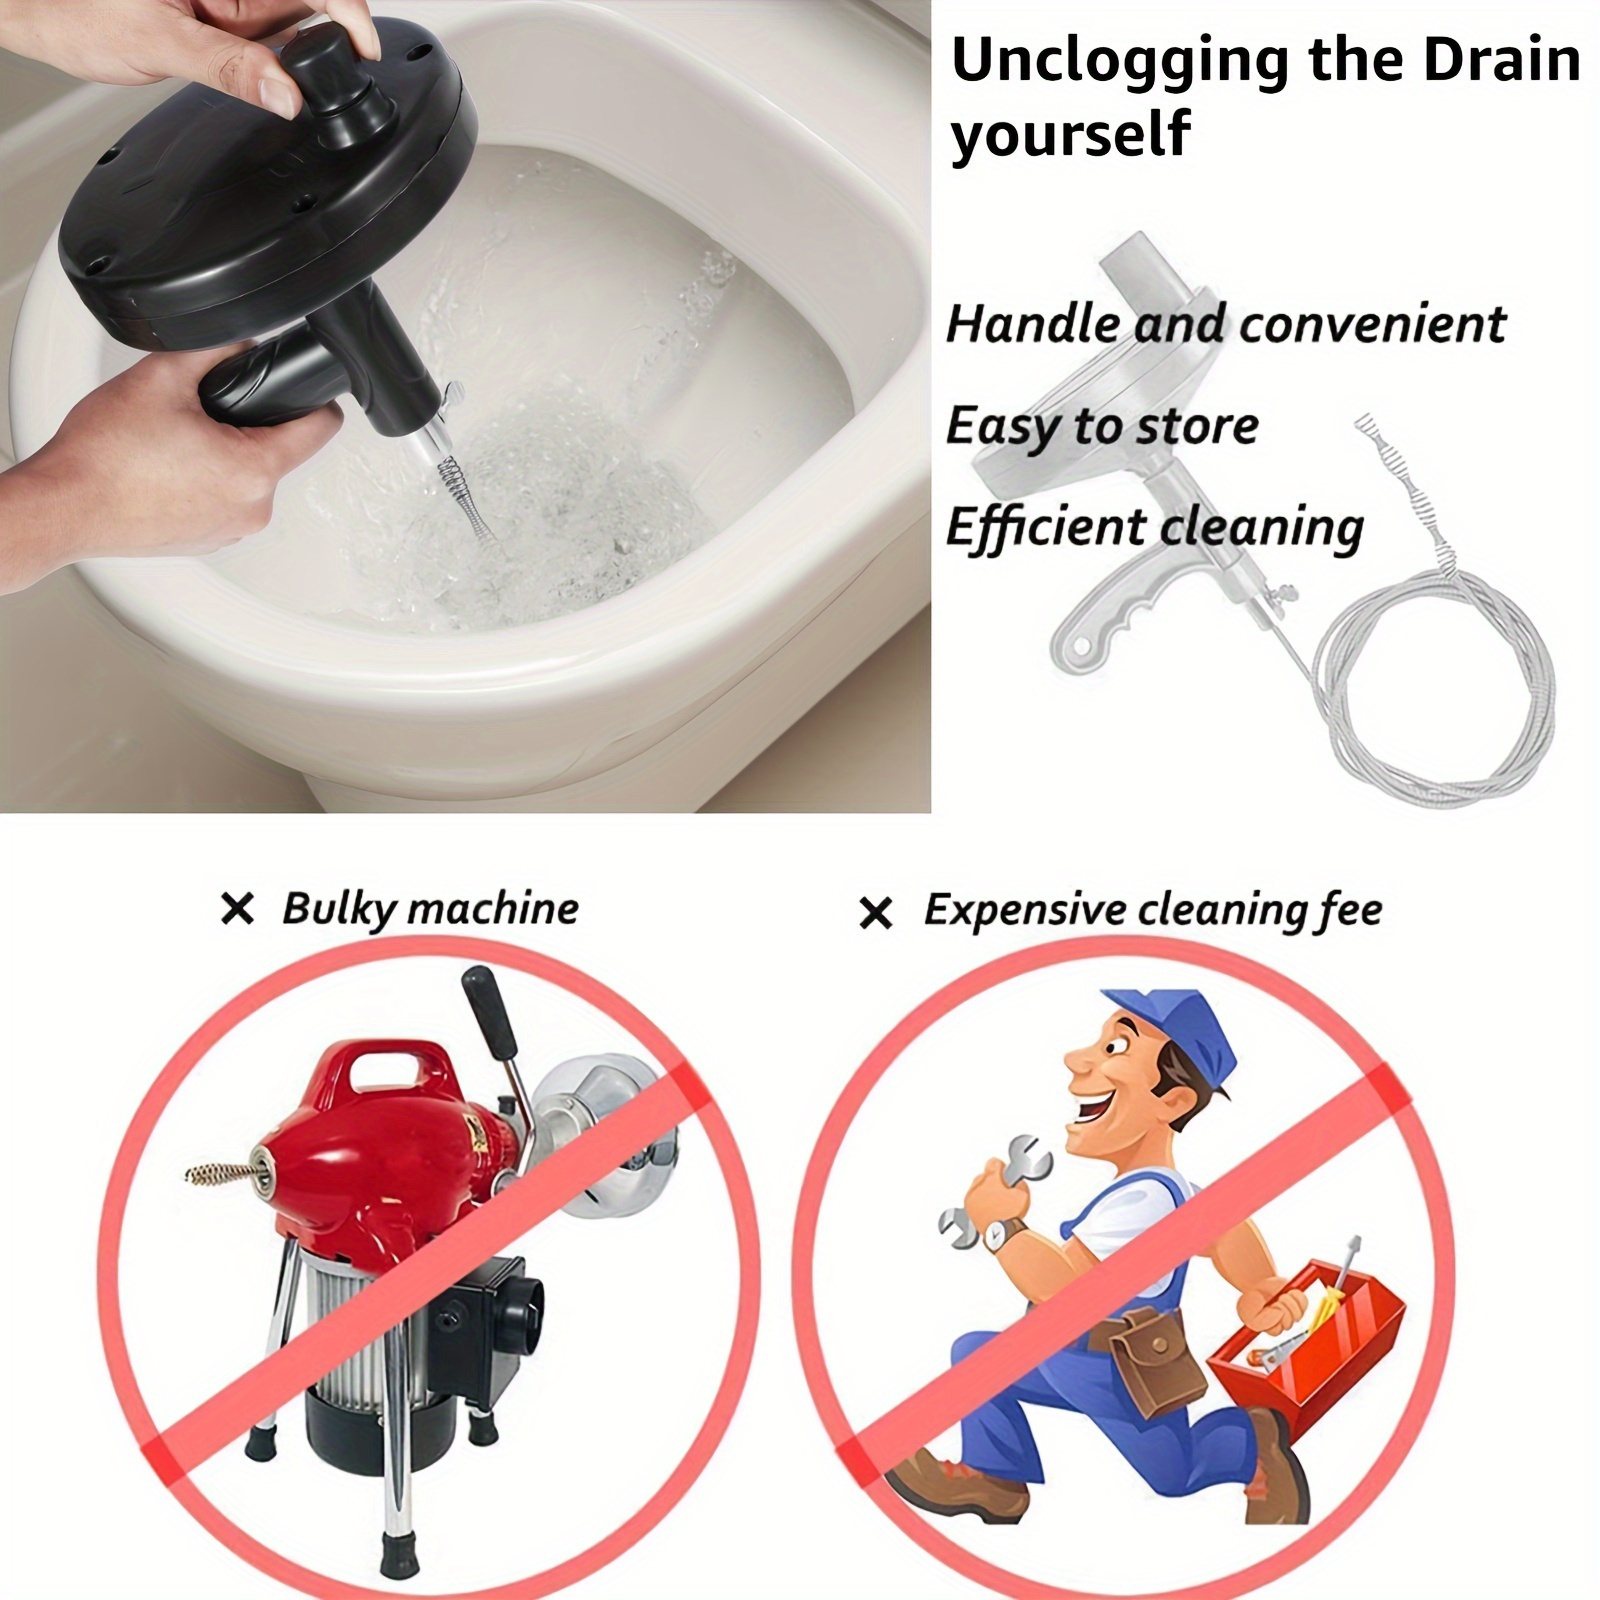 sink Snake Plumbers Pro Quality No Chemical Drain Cleaner Unclog Sink Tub  Drain